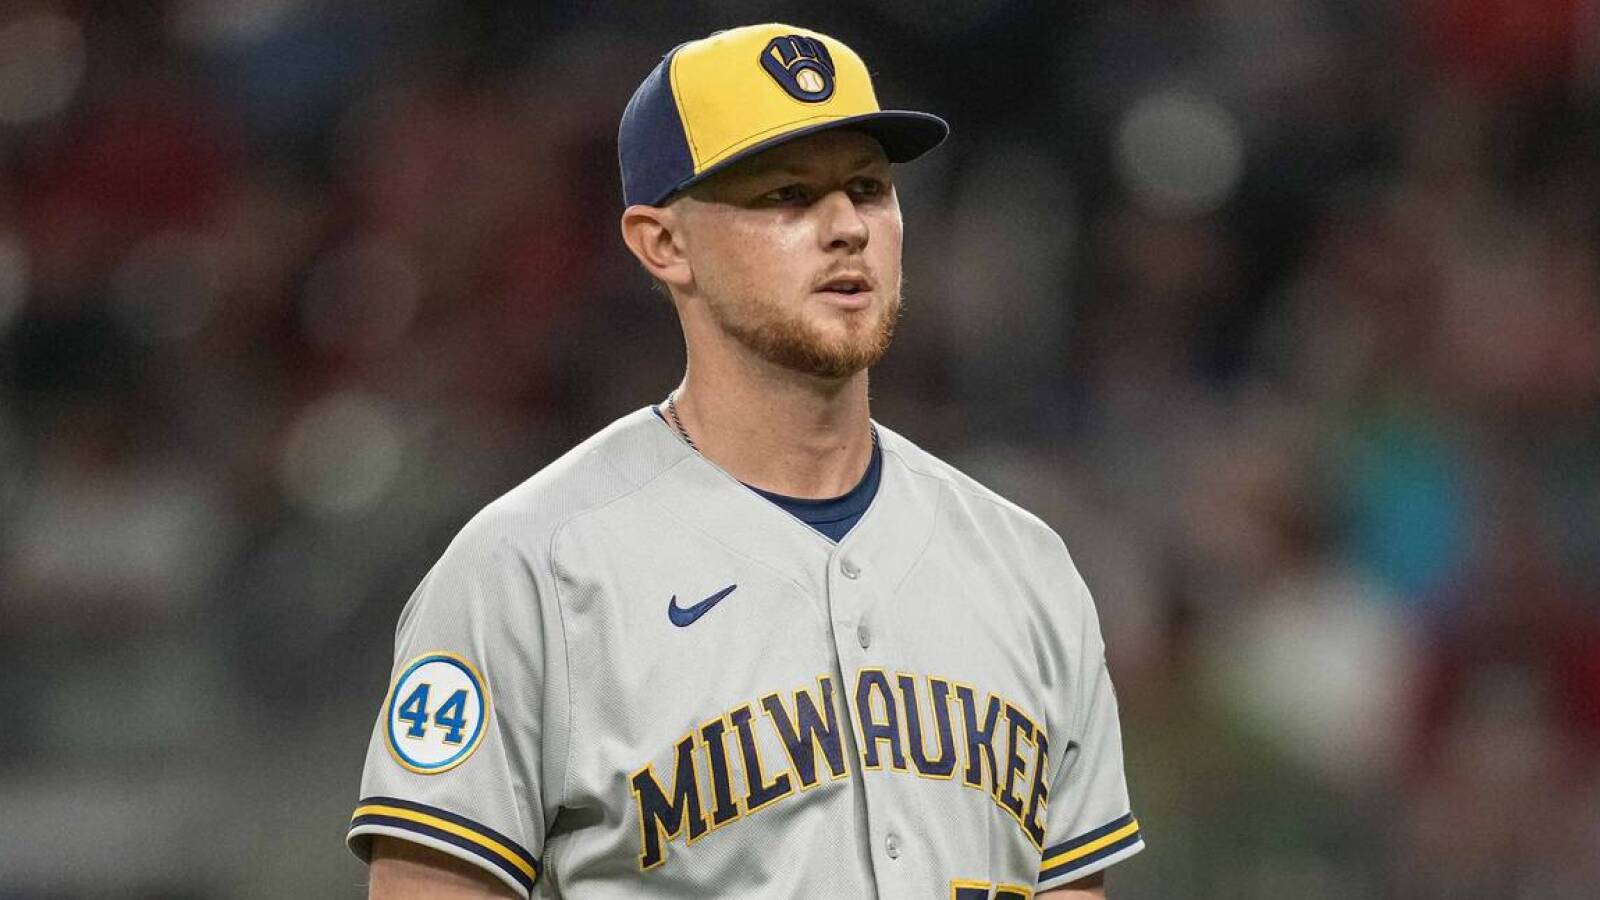 Brewers pitcher Eric Lauer chastises front office for trade deadline moves